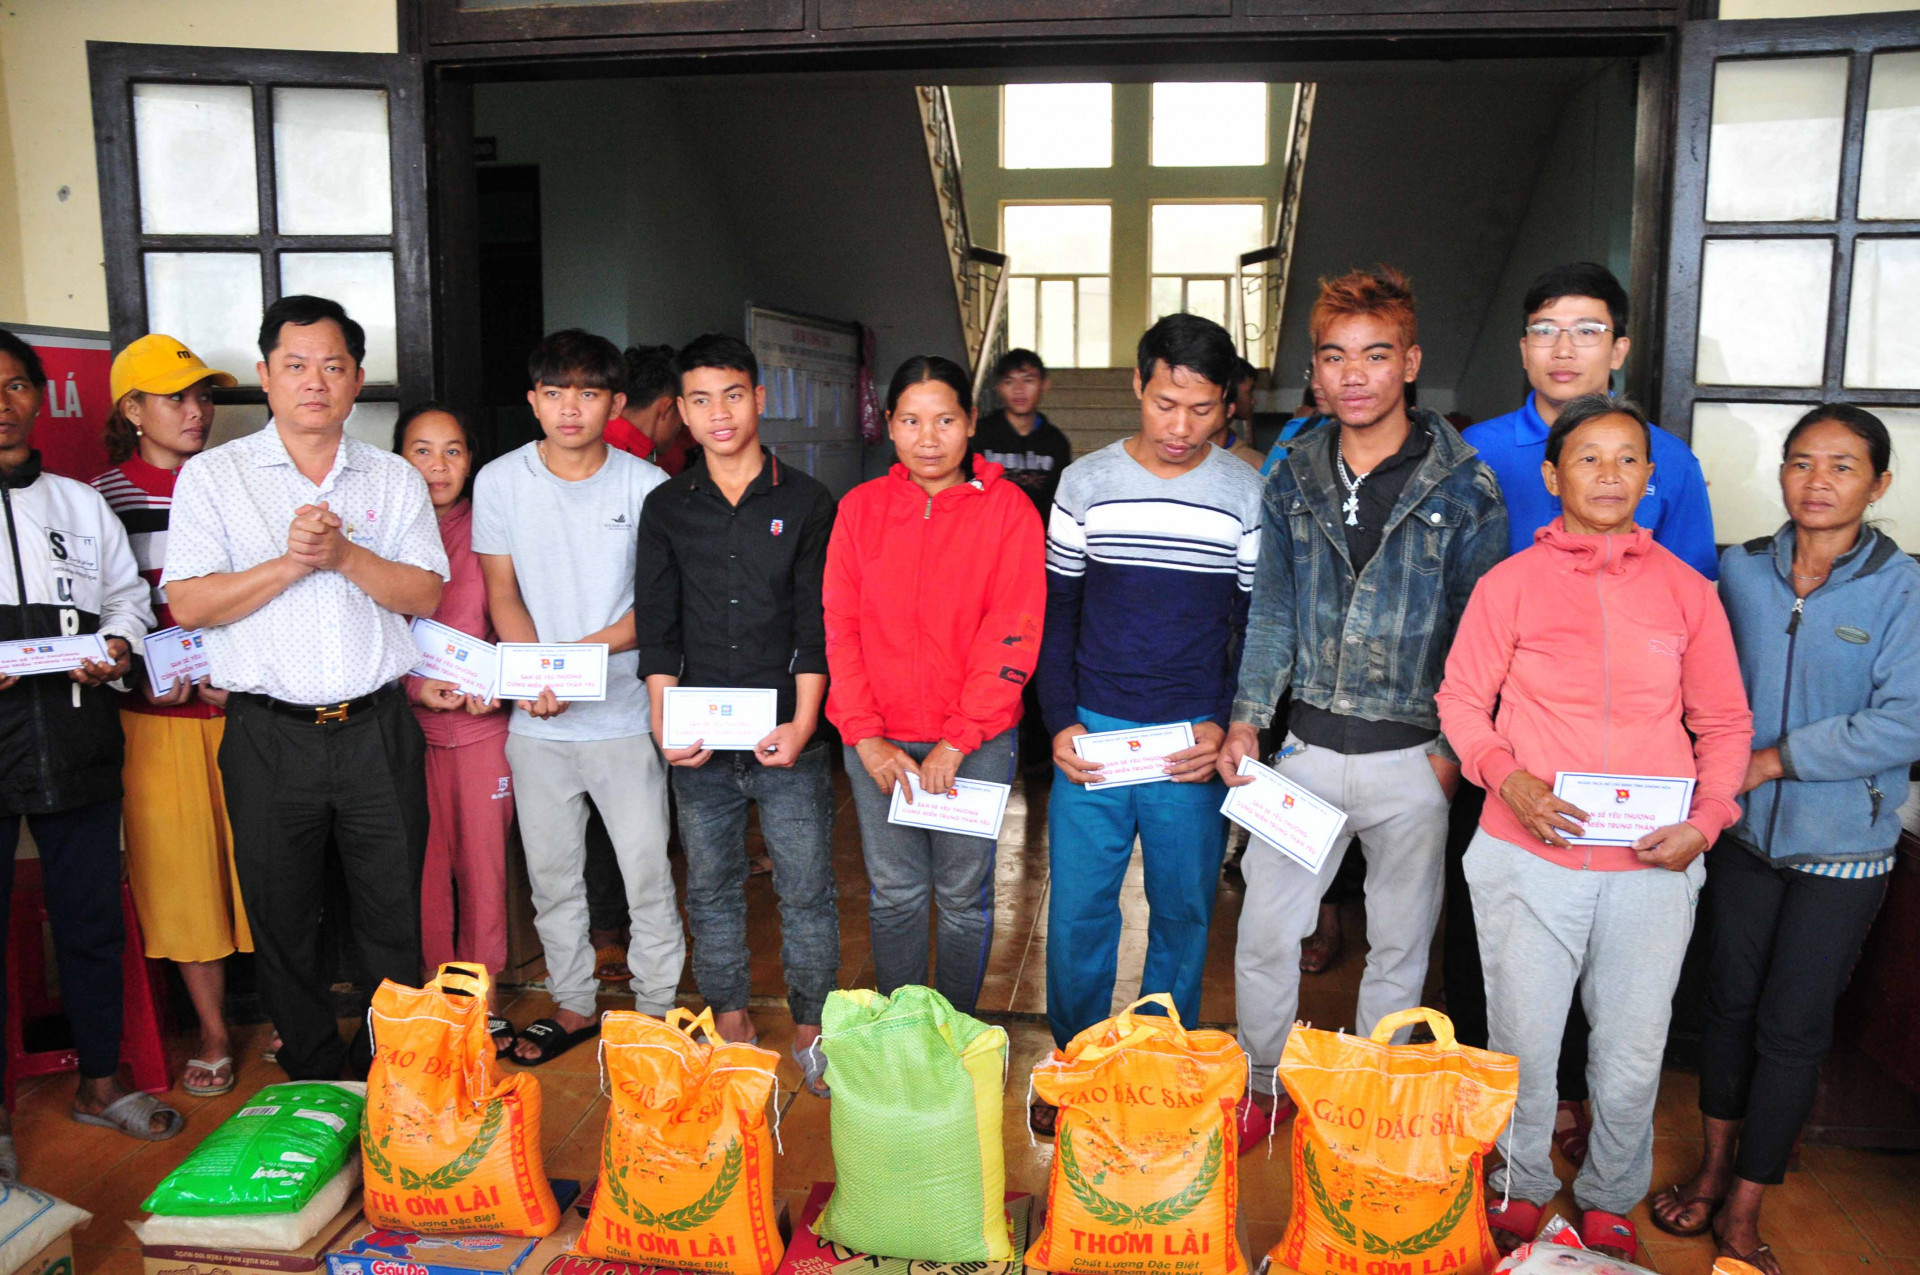 Khanh Hoa Young Entrepreneurs’ Association giving gifts to people in Quang Nam Province